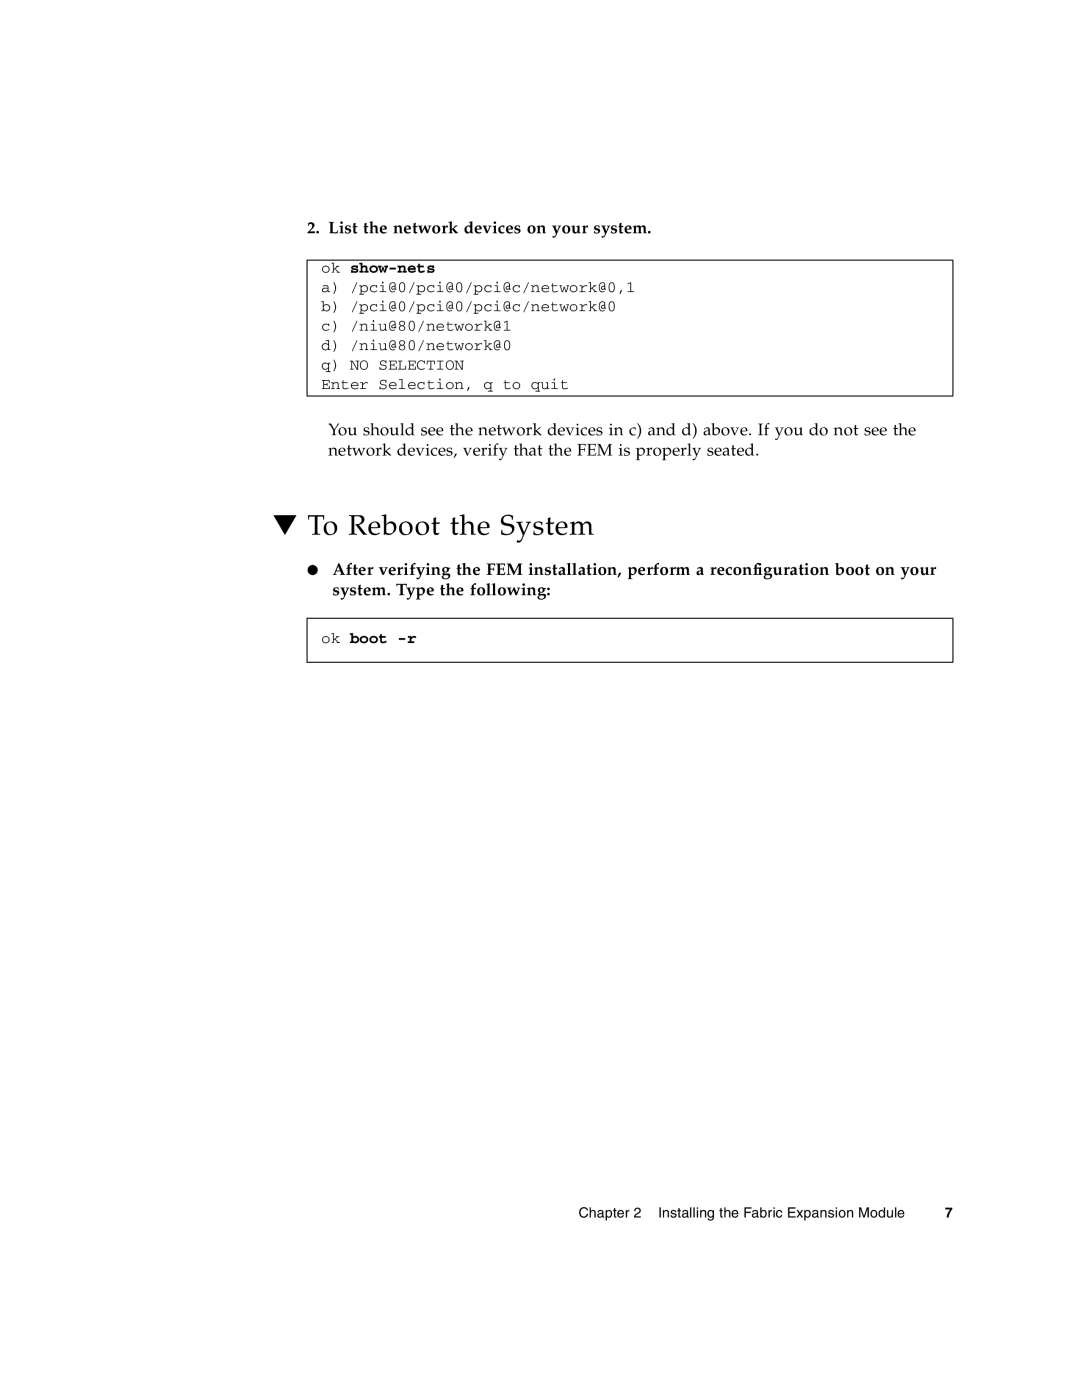 Sun Microsystems T6320 manual To Reboot the System, List the network devices on your system, ok show-nets, ok boot -r 